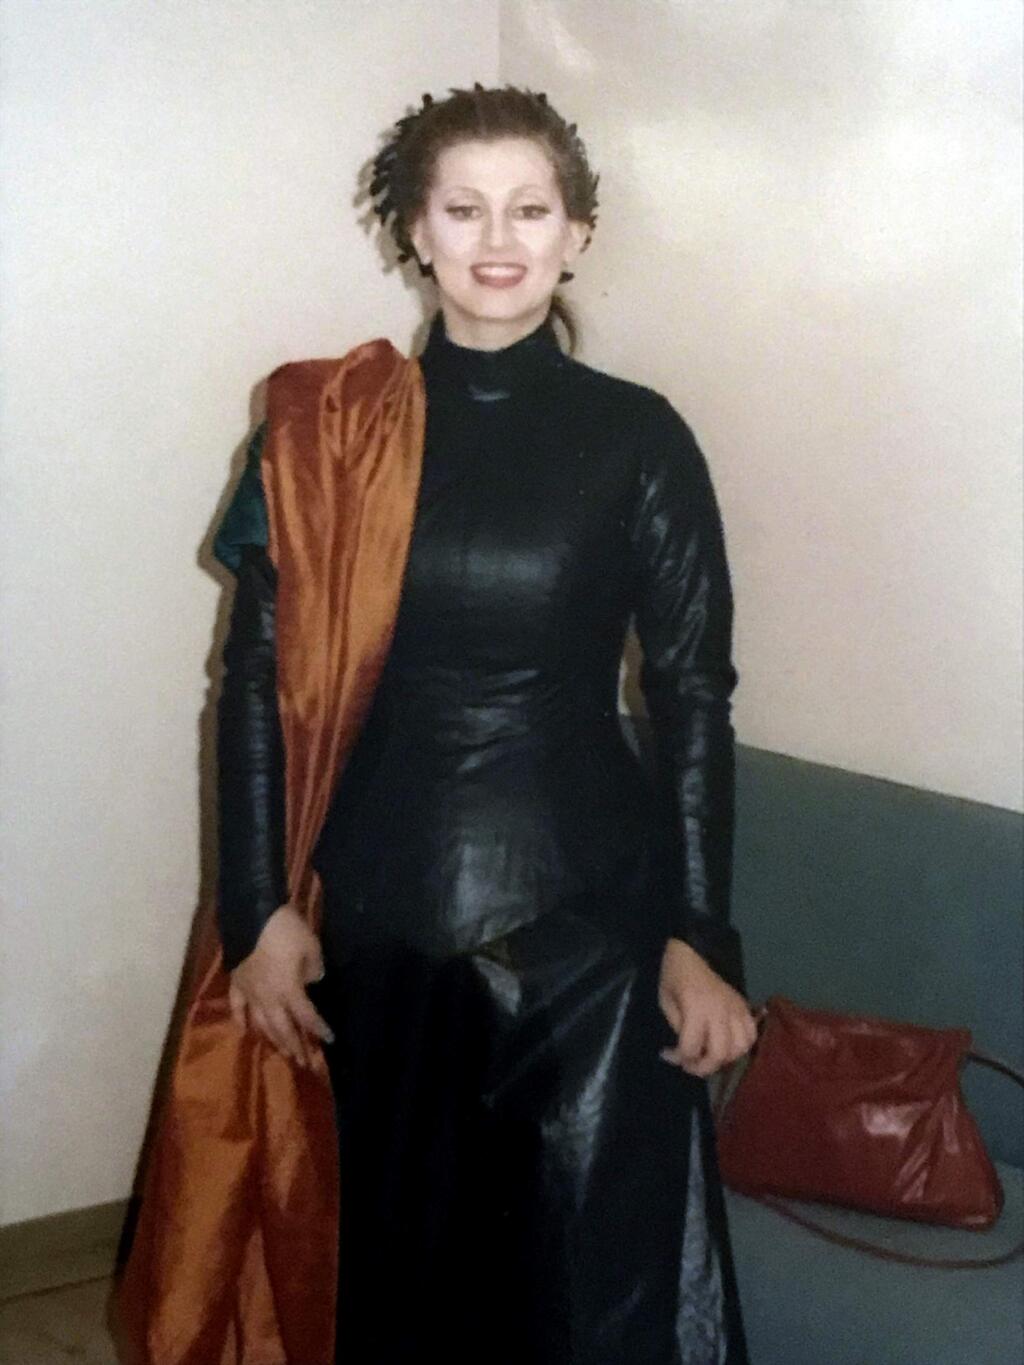 In this 1991 photo Paula Rasmussen poses while dressed for her part in 'Les Troyens' at the Los Angeles Opera. Rasmussen is one of four women who have accused renowned conductor Charles Dutoit of sexual misconduct that allegedly occurred on the sidelines of rehearsals or performances with some of America's great orchestras. Dutoit, 81, is the artistic director and principal conductor at London's Royal Philharmonic Orchestra. (Paula Rasmussen via AP)